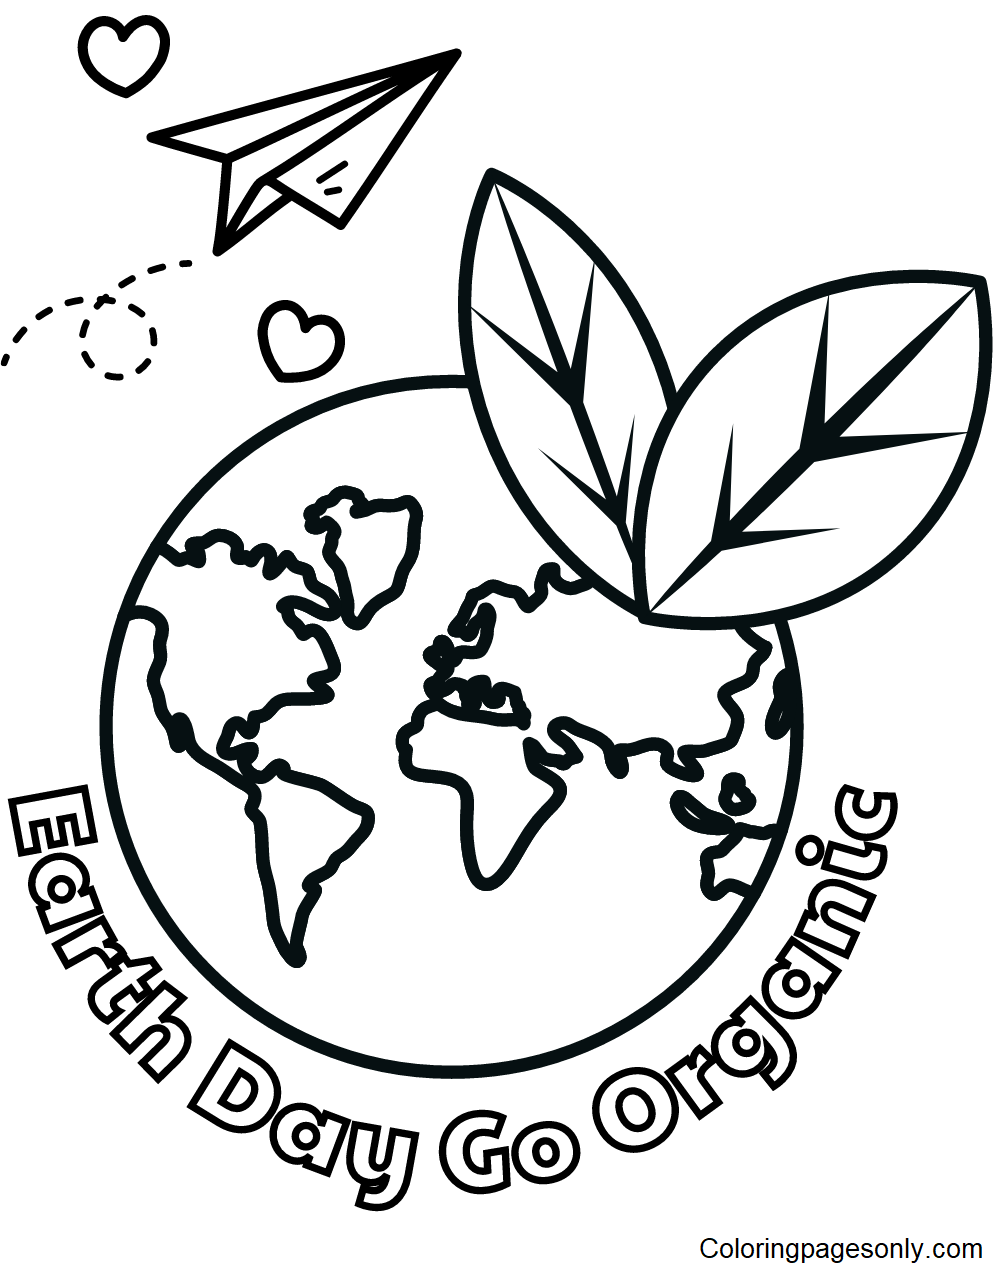 Earth Day Go Organic Coloring Pages